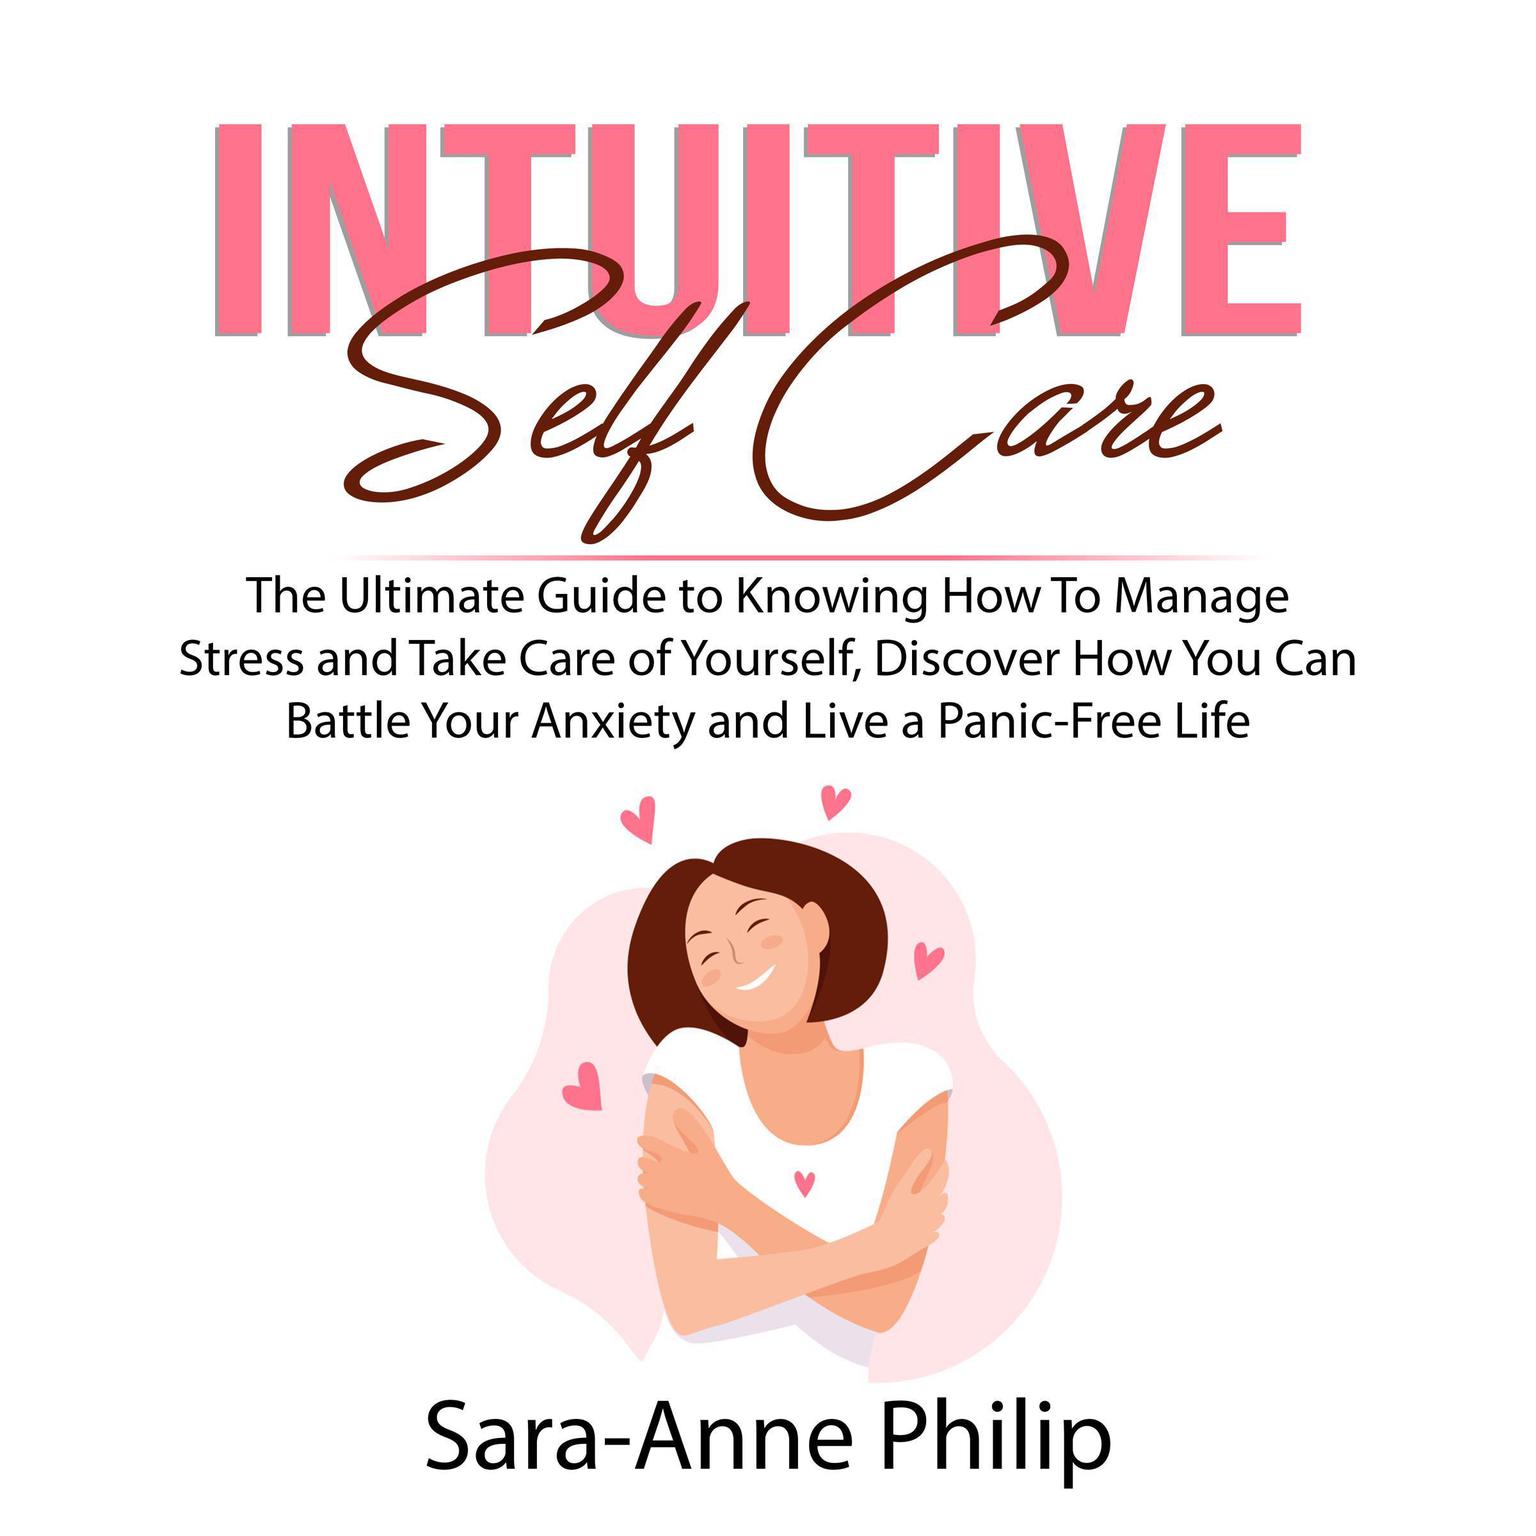 Intuitive Self Care: The Ultimate Guide to Knowing How To Manage Stress and Take Care of Yourself, Discover How You Can Battle Your Anxiety and Live a Panic-Free Life Audiobook, by Sara-Anne Philip